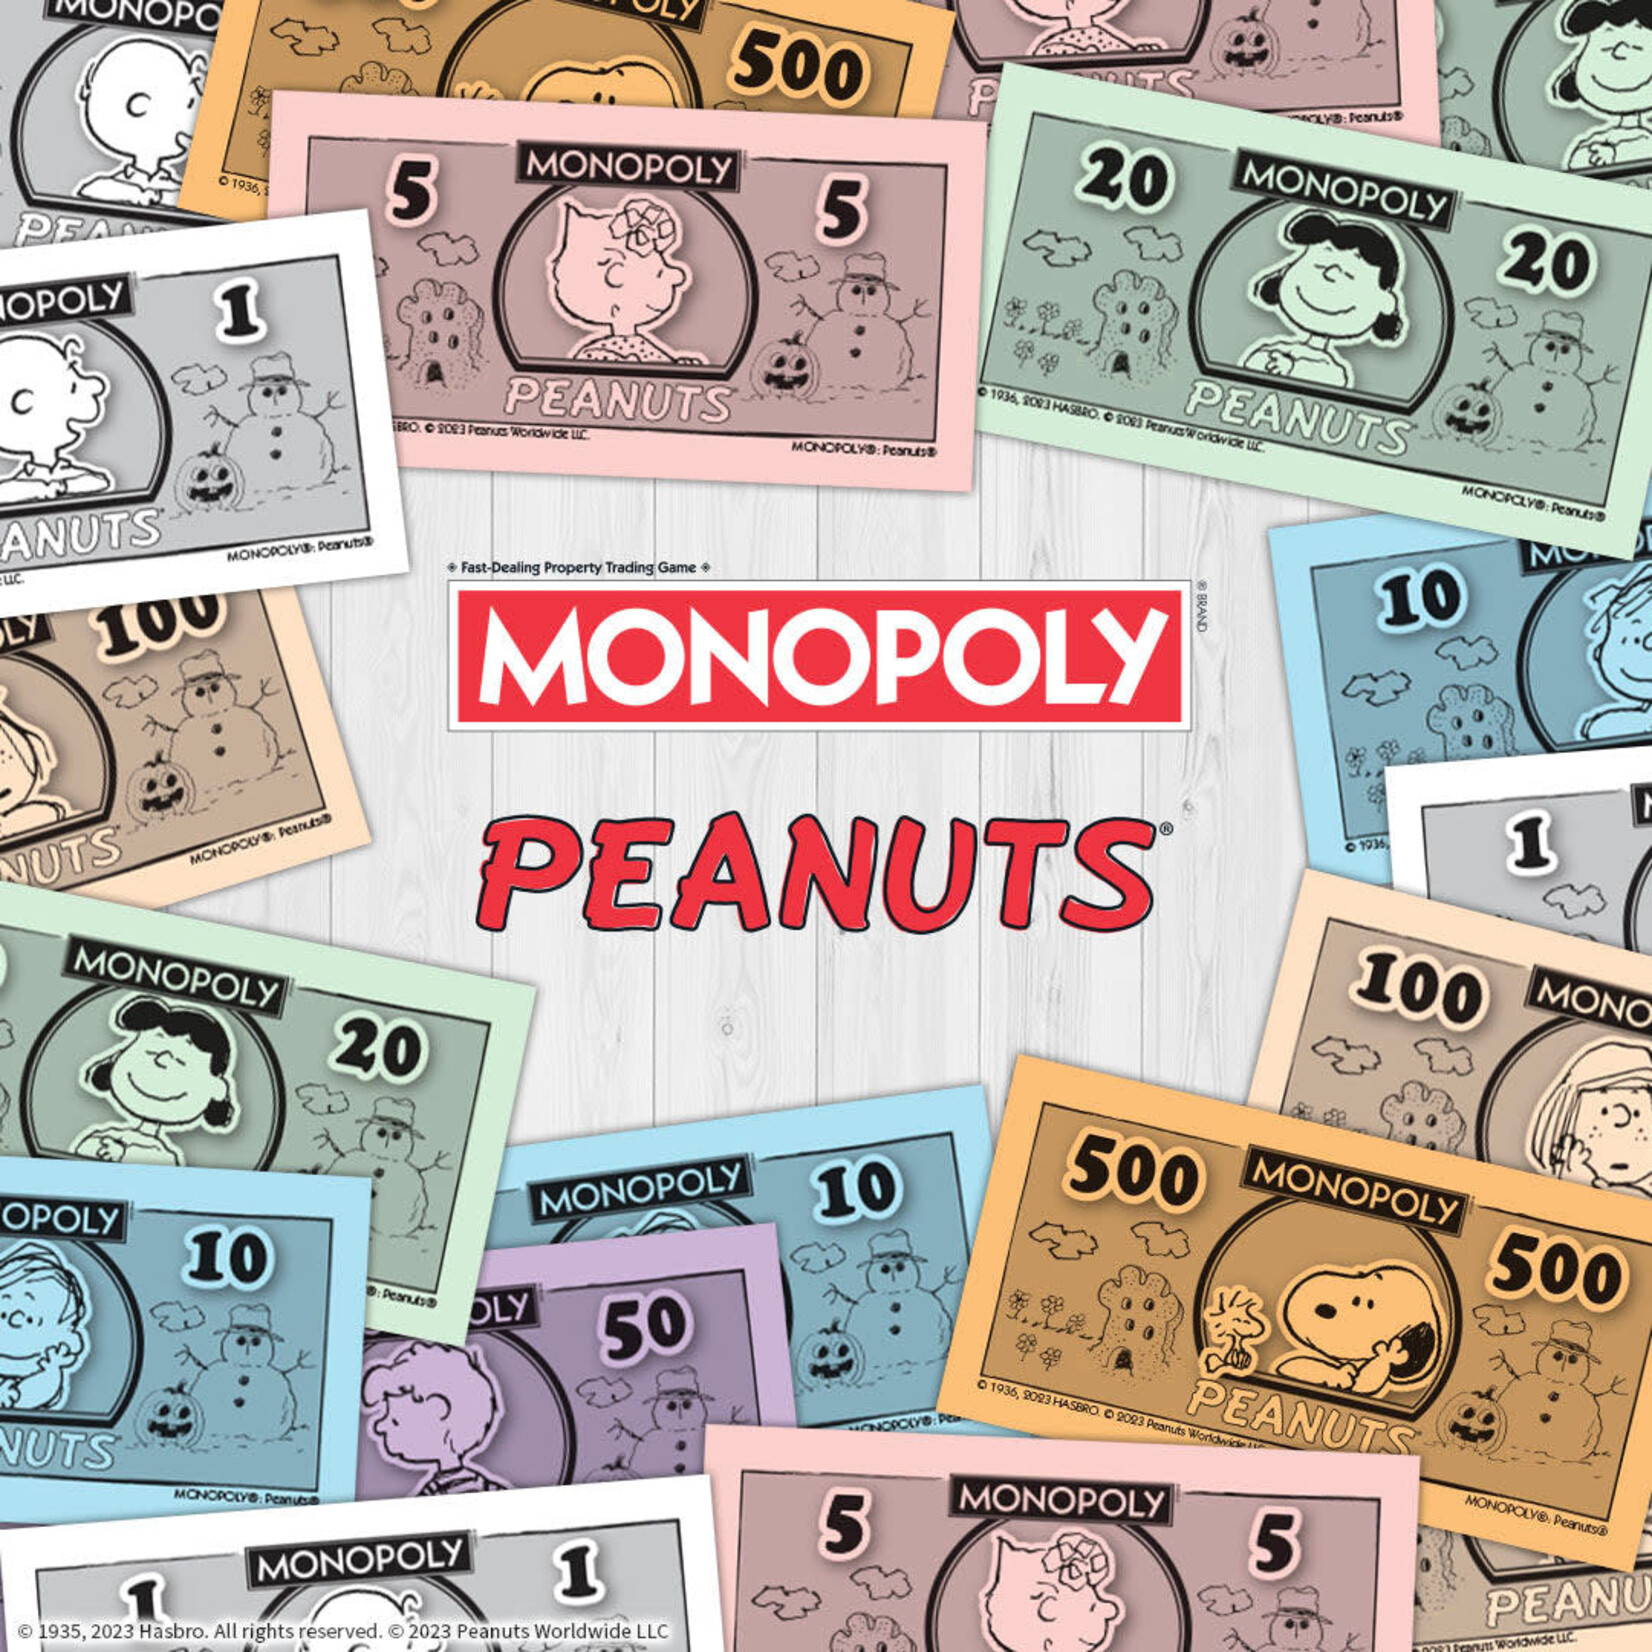 The Op Monopoly: Peanuts